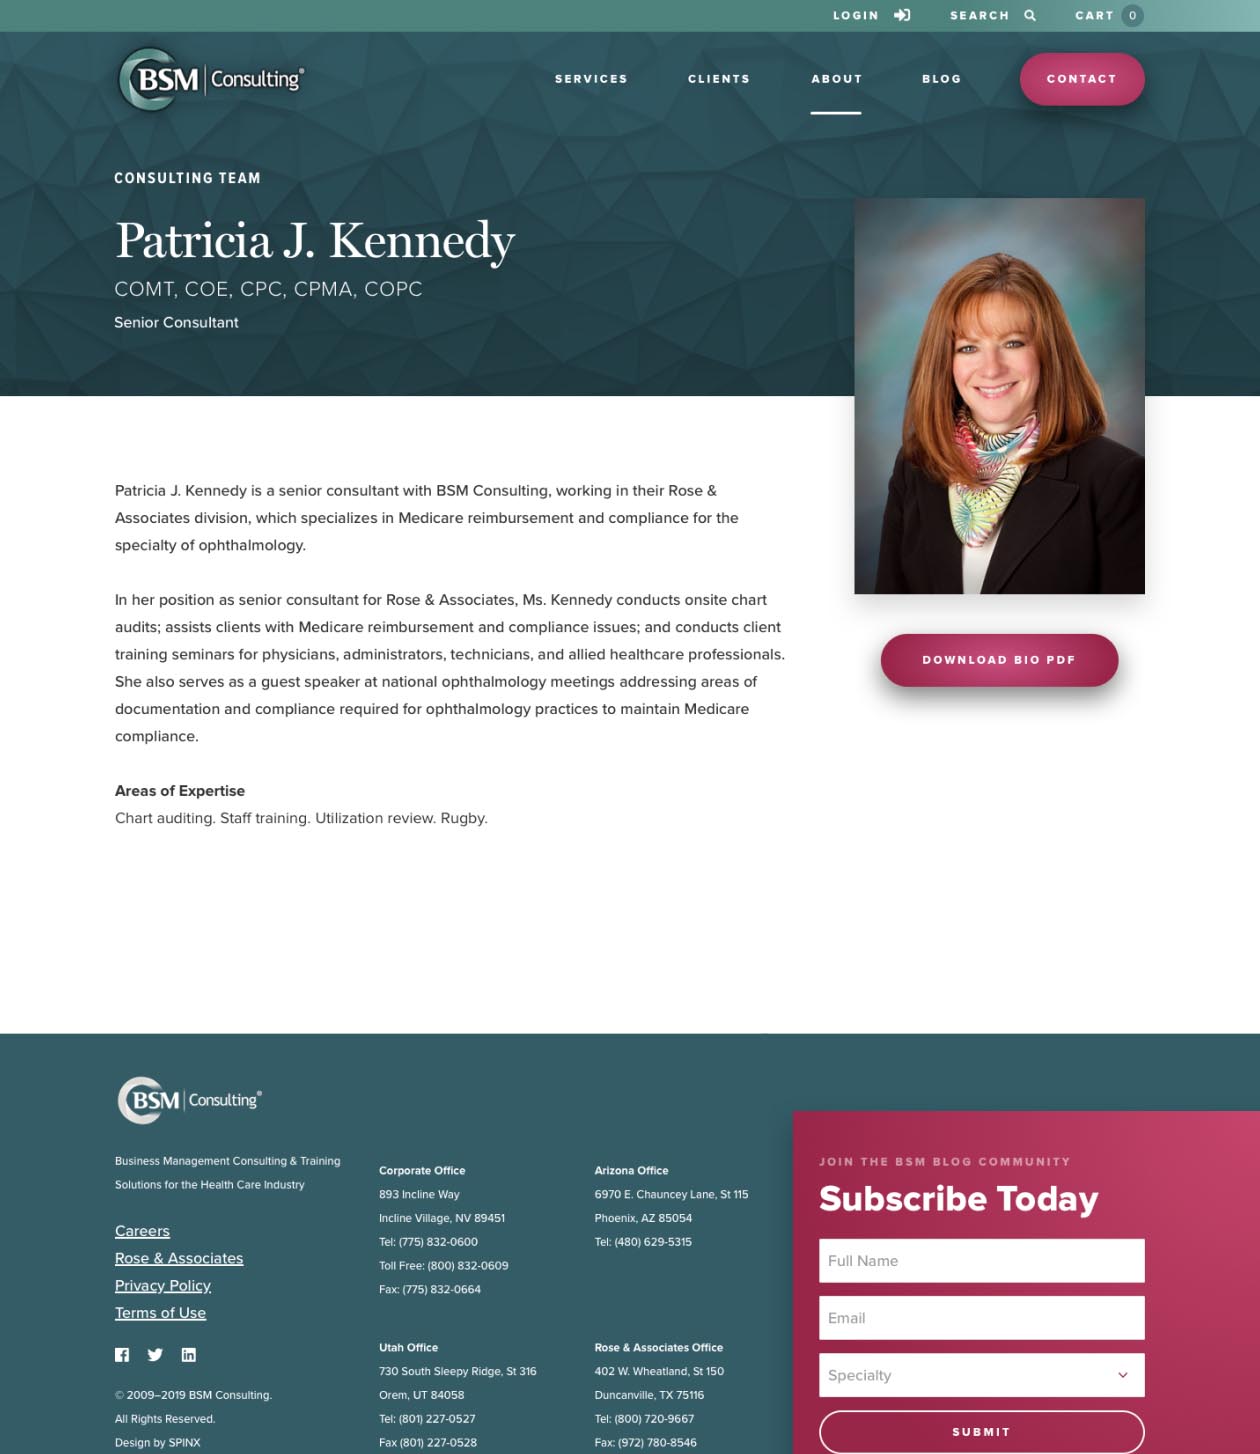 bsmconsulting-webdesign-casestudy-7